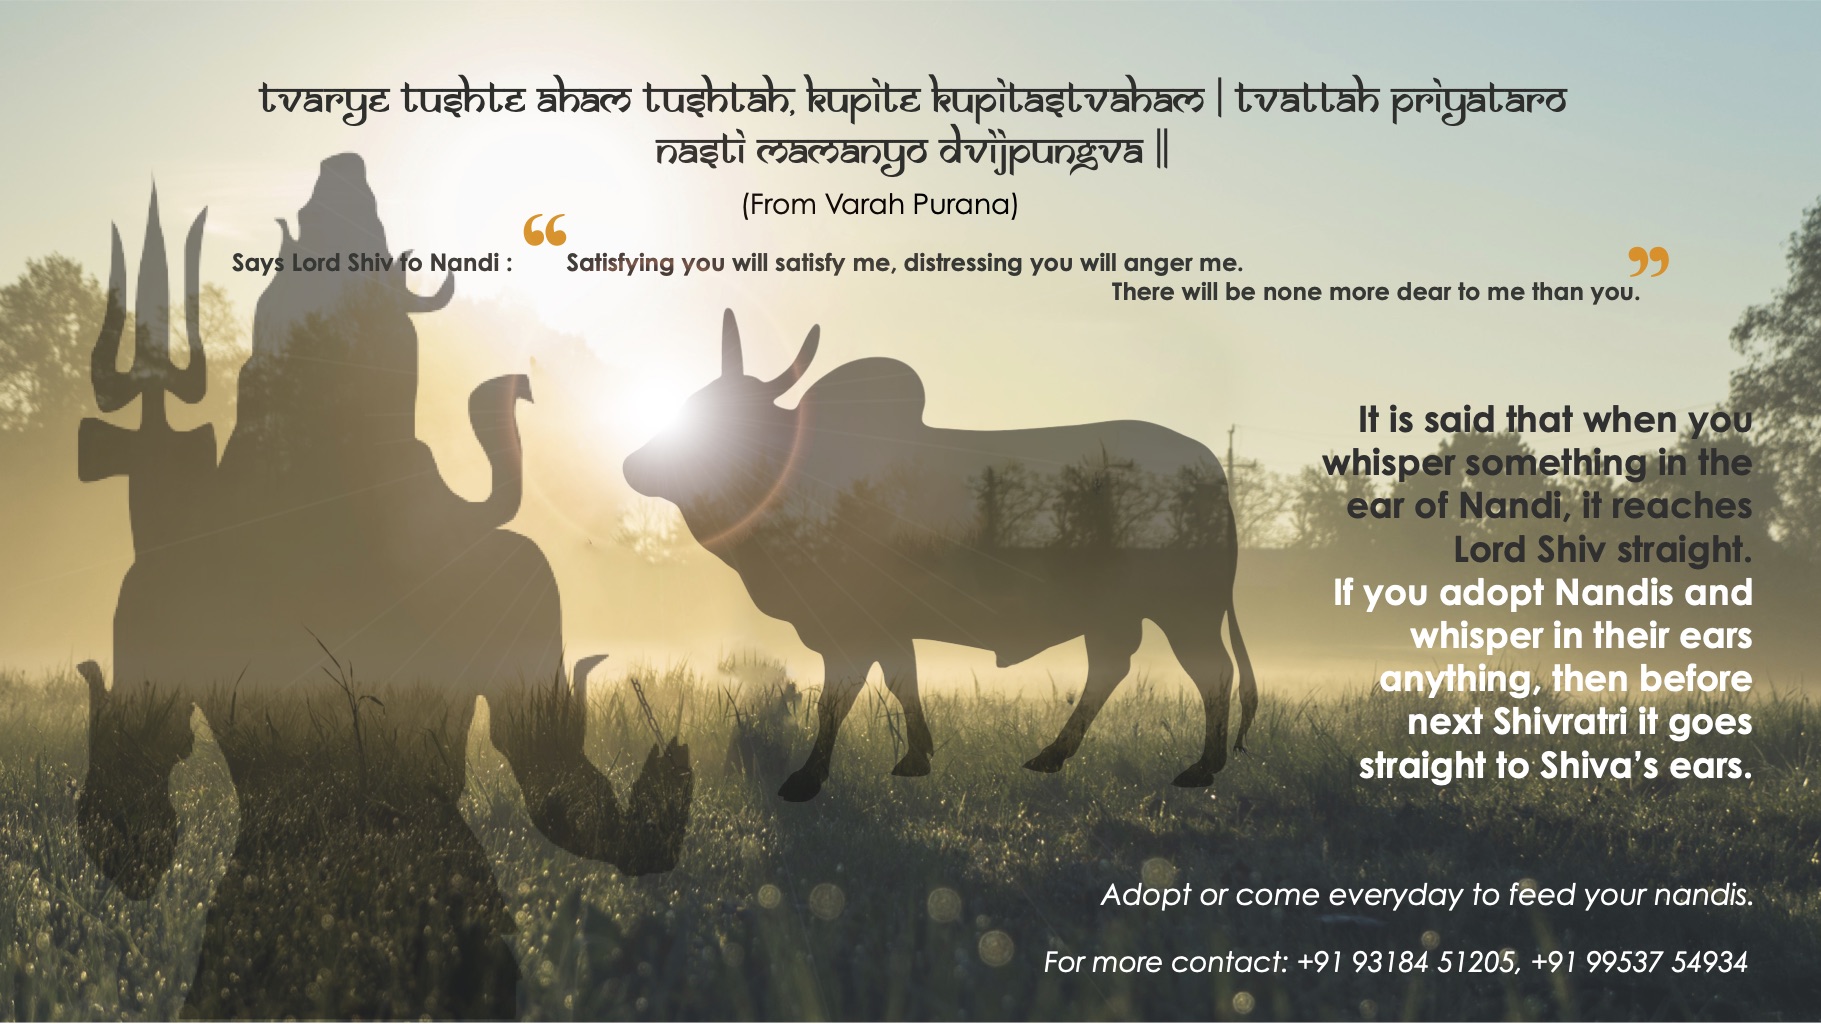 Save a Cow | Dhyan Foundation